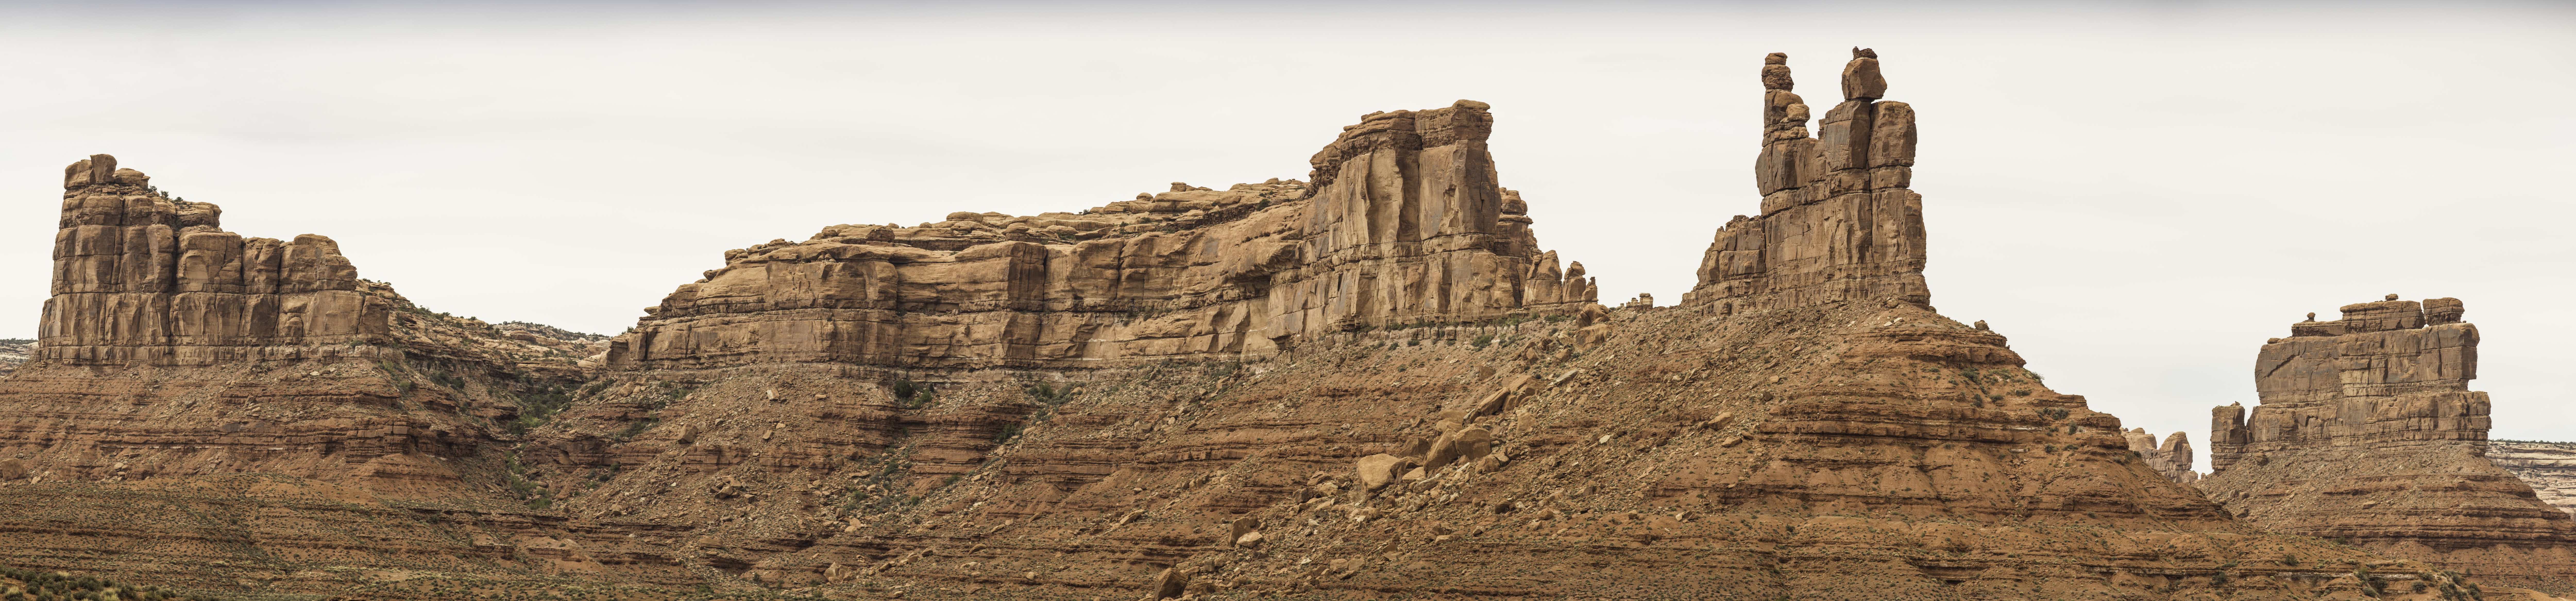 Rock Formations, Valley of the Gods